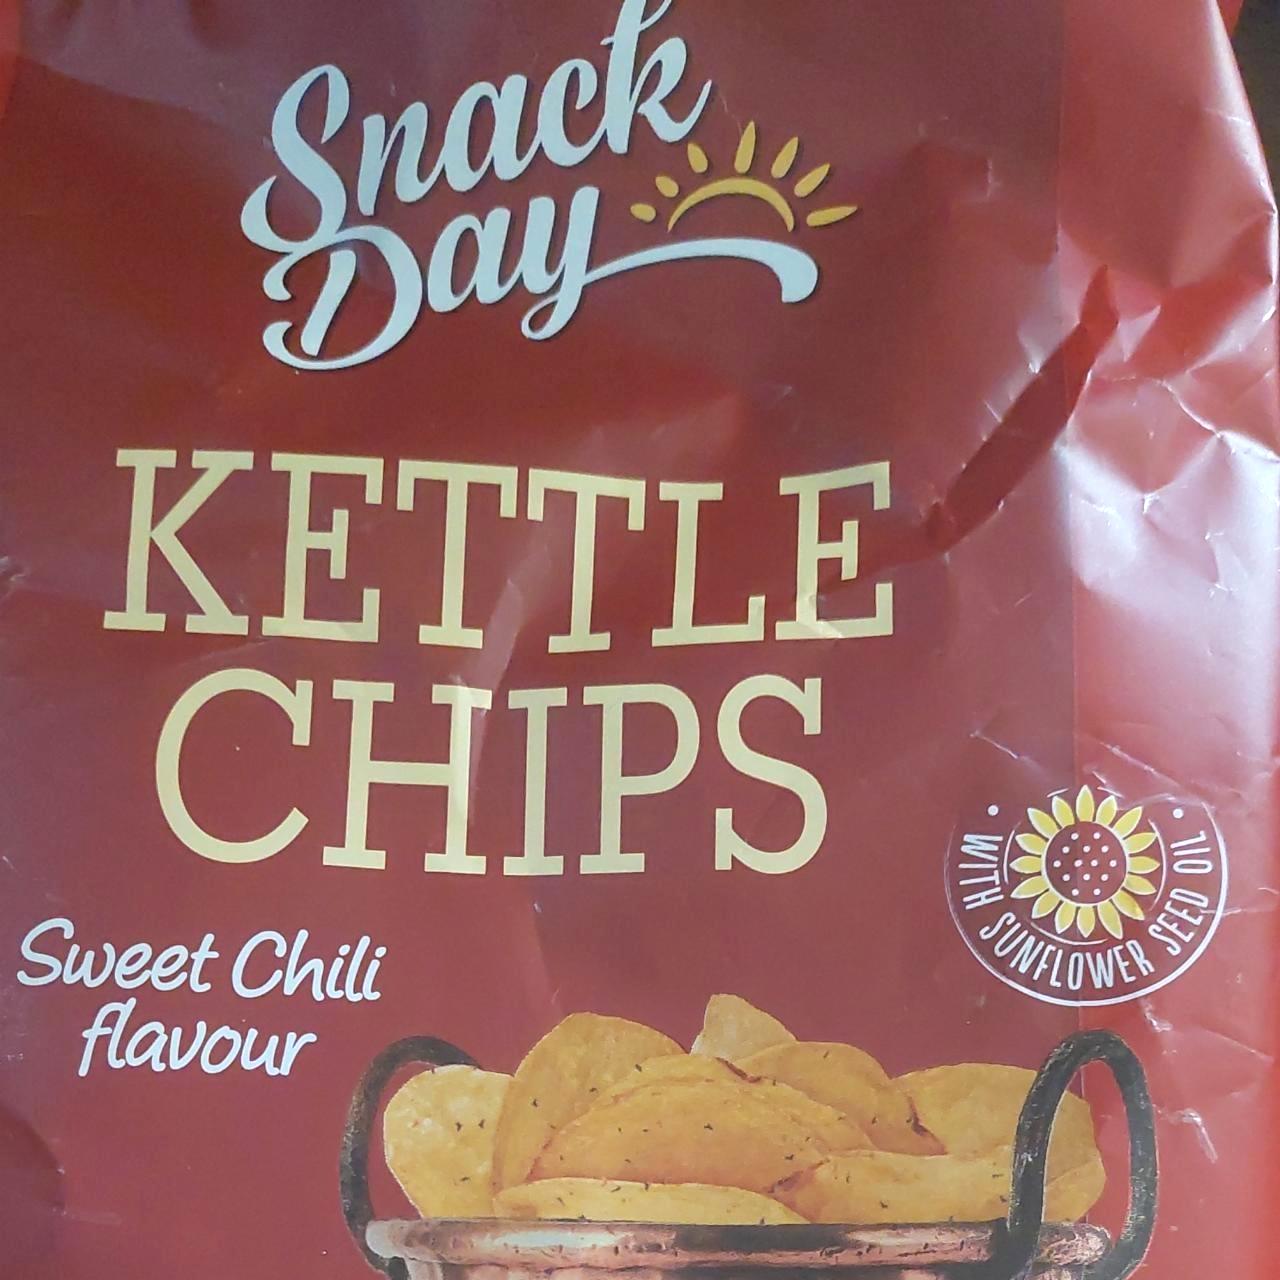 Képek - Kettle chips Sweet chili Snack Day